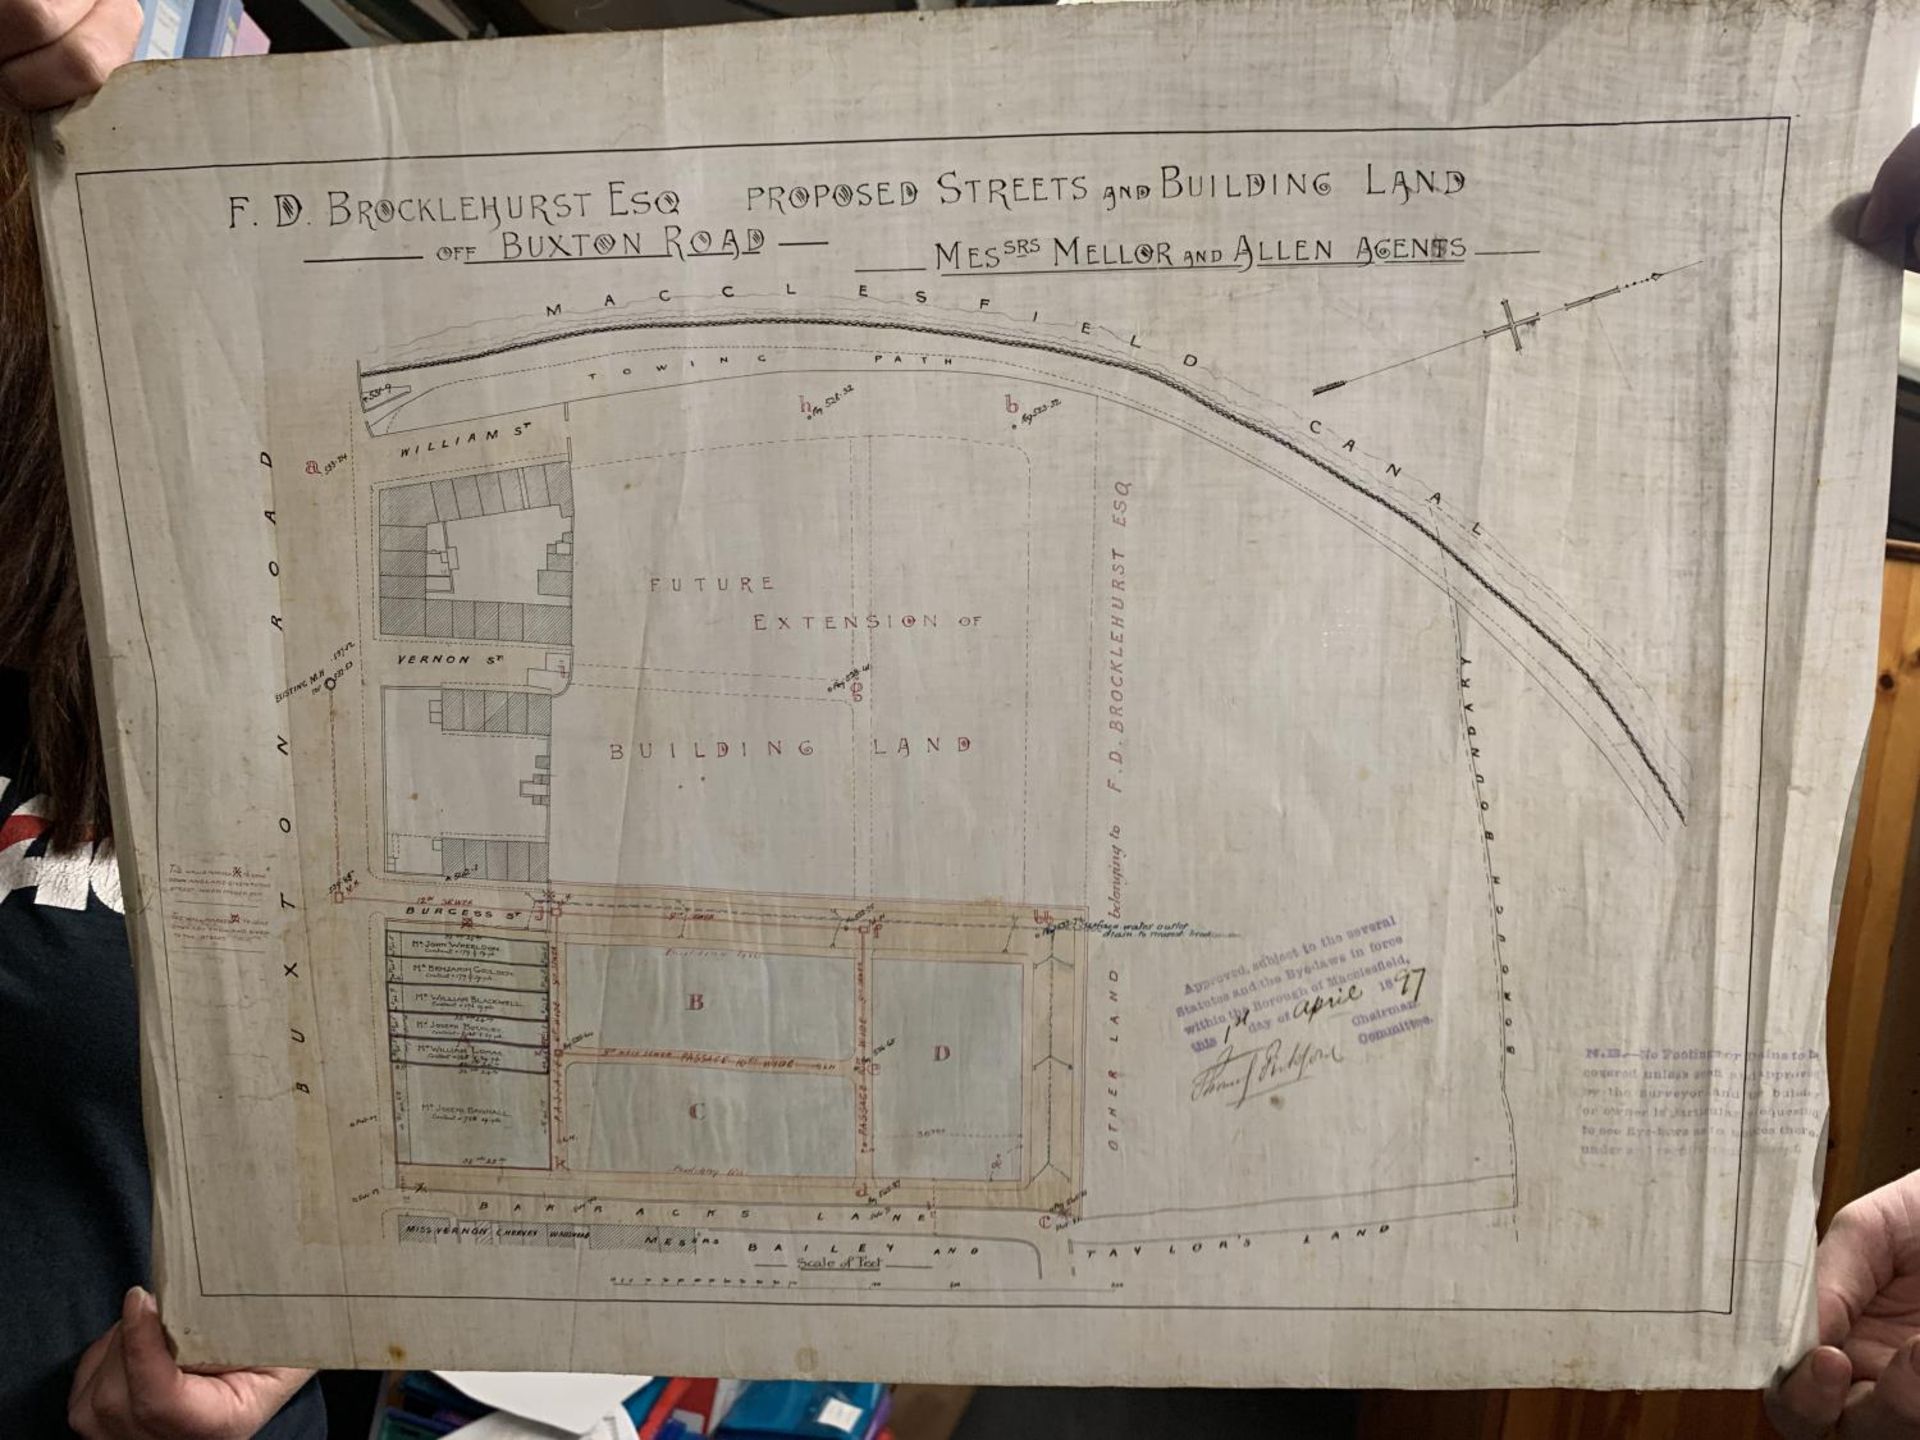 AN ANTIQUARIAN PLAN FOR F.D.BROCKLEHURST ESQ FOR THE PROPOSED STREETS AND BUILDING LAND OF BUXTON